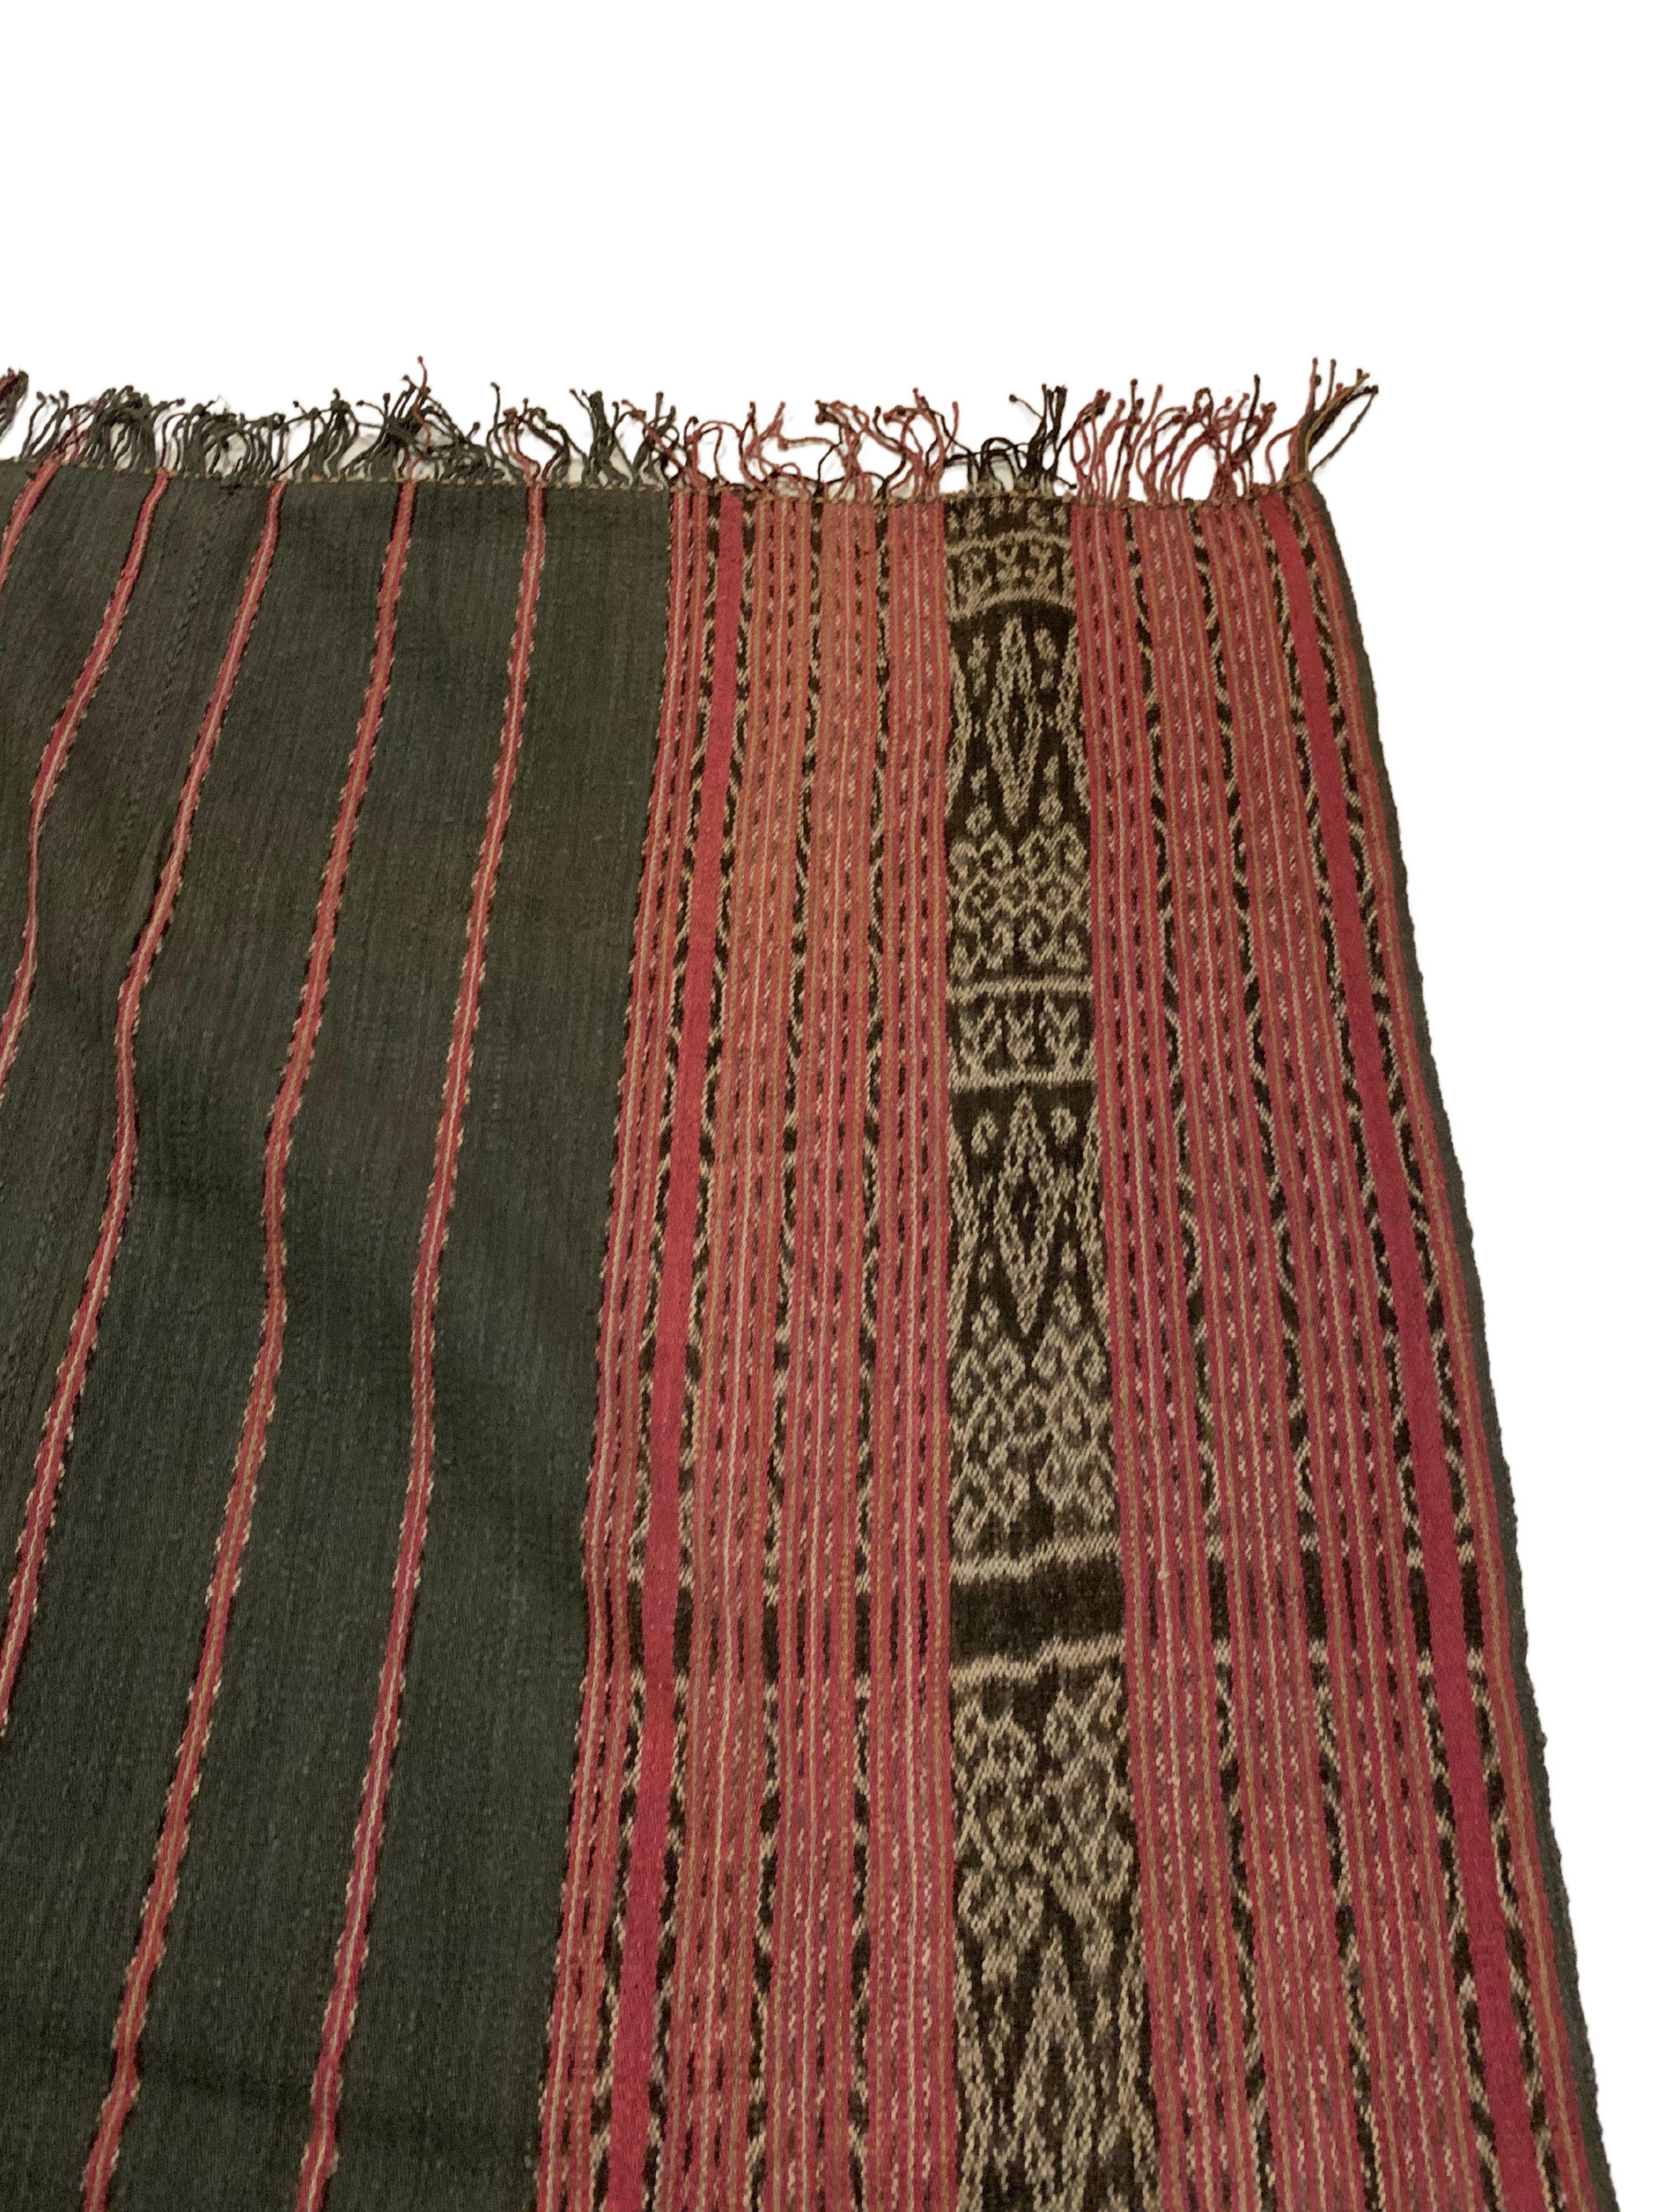 Hand-Woven Ikat Textile from Timor Stunning Tribal Motifs & Colors, Indonesia, c. 1950